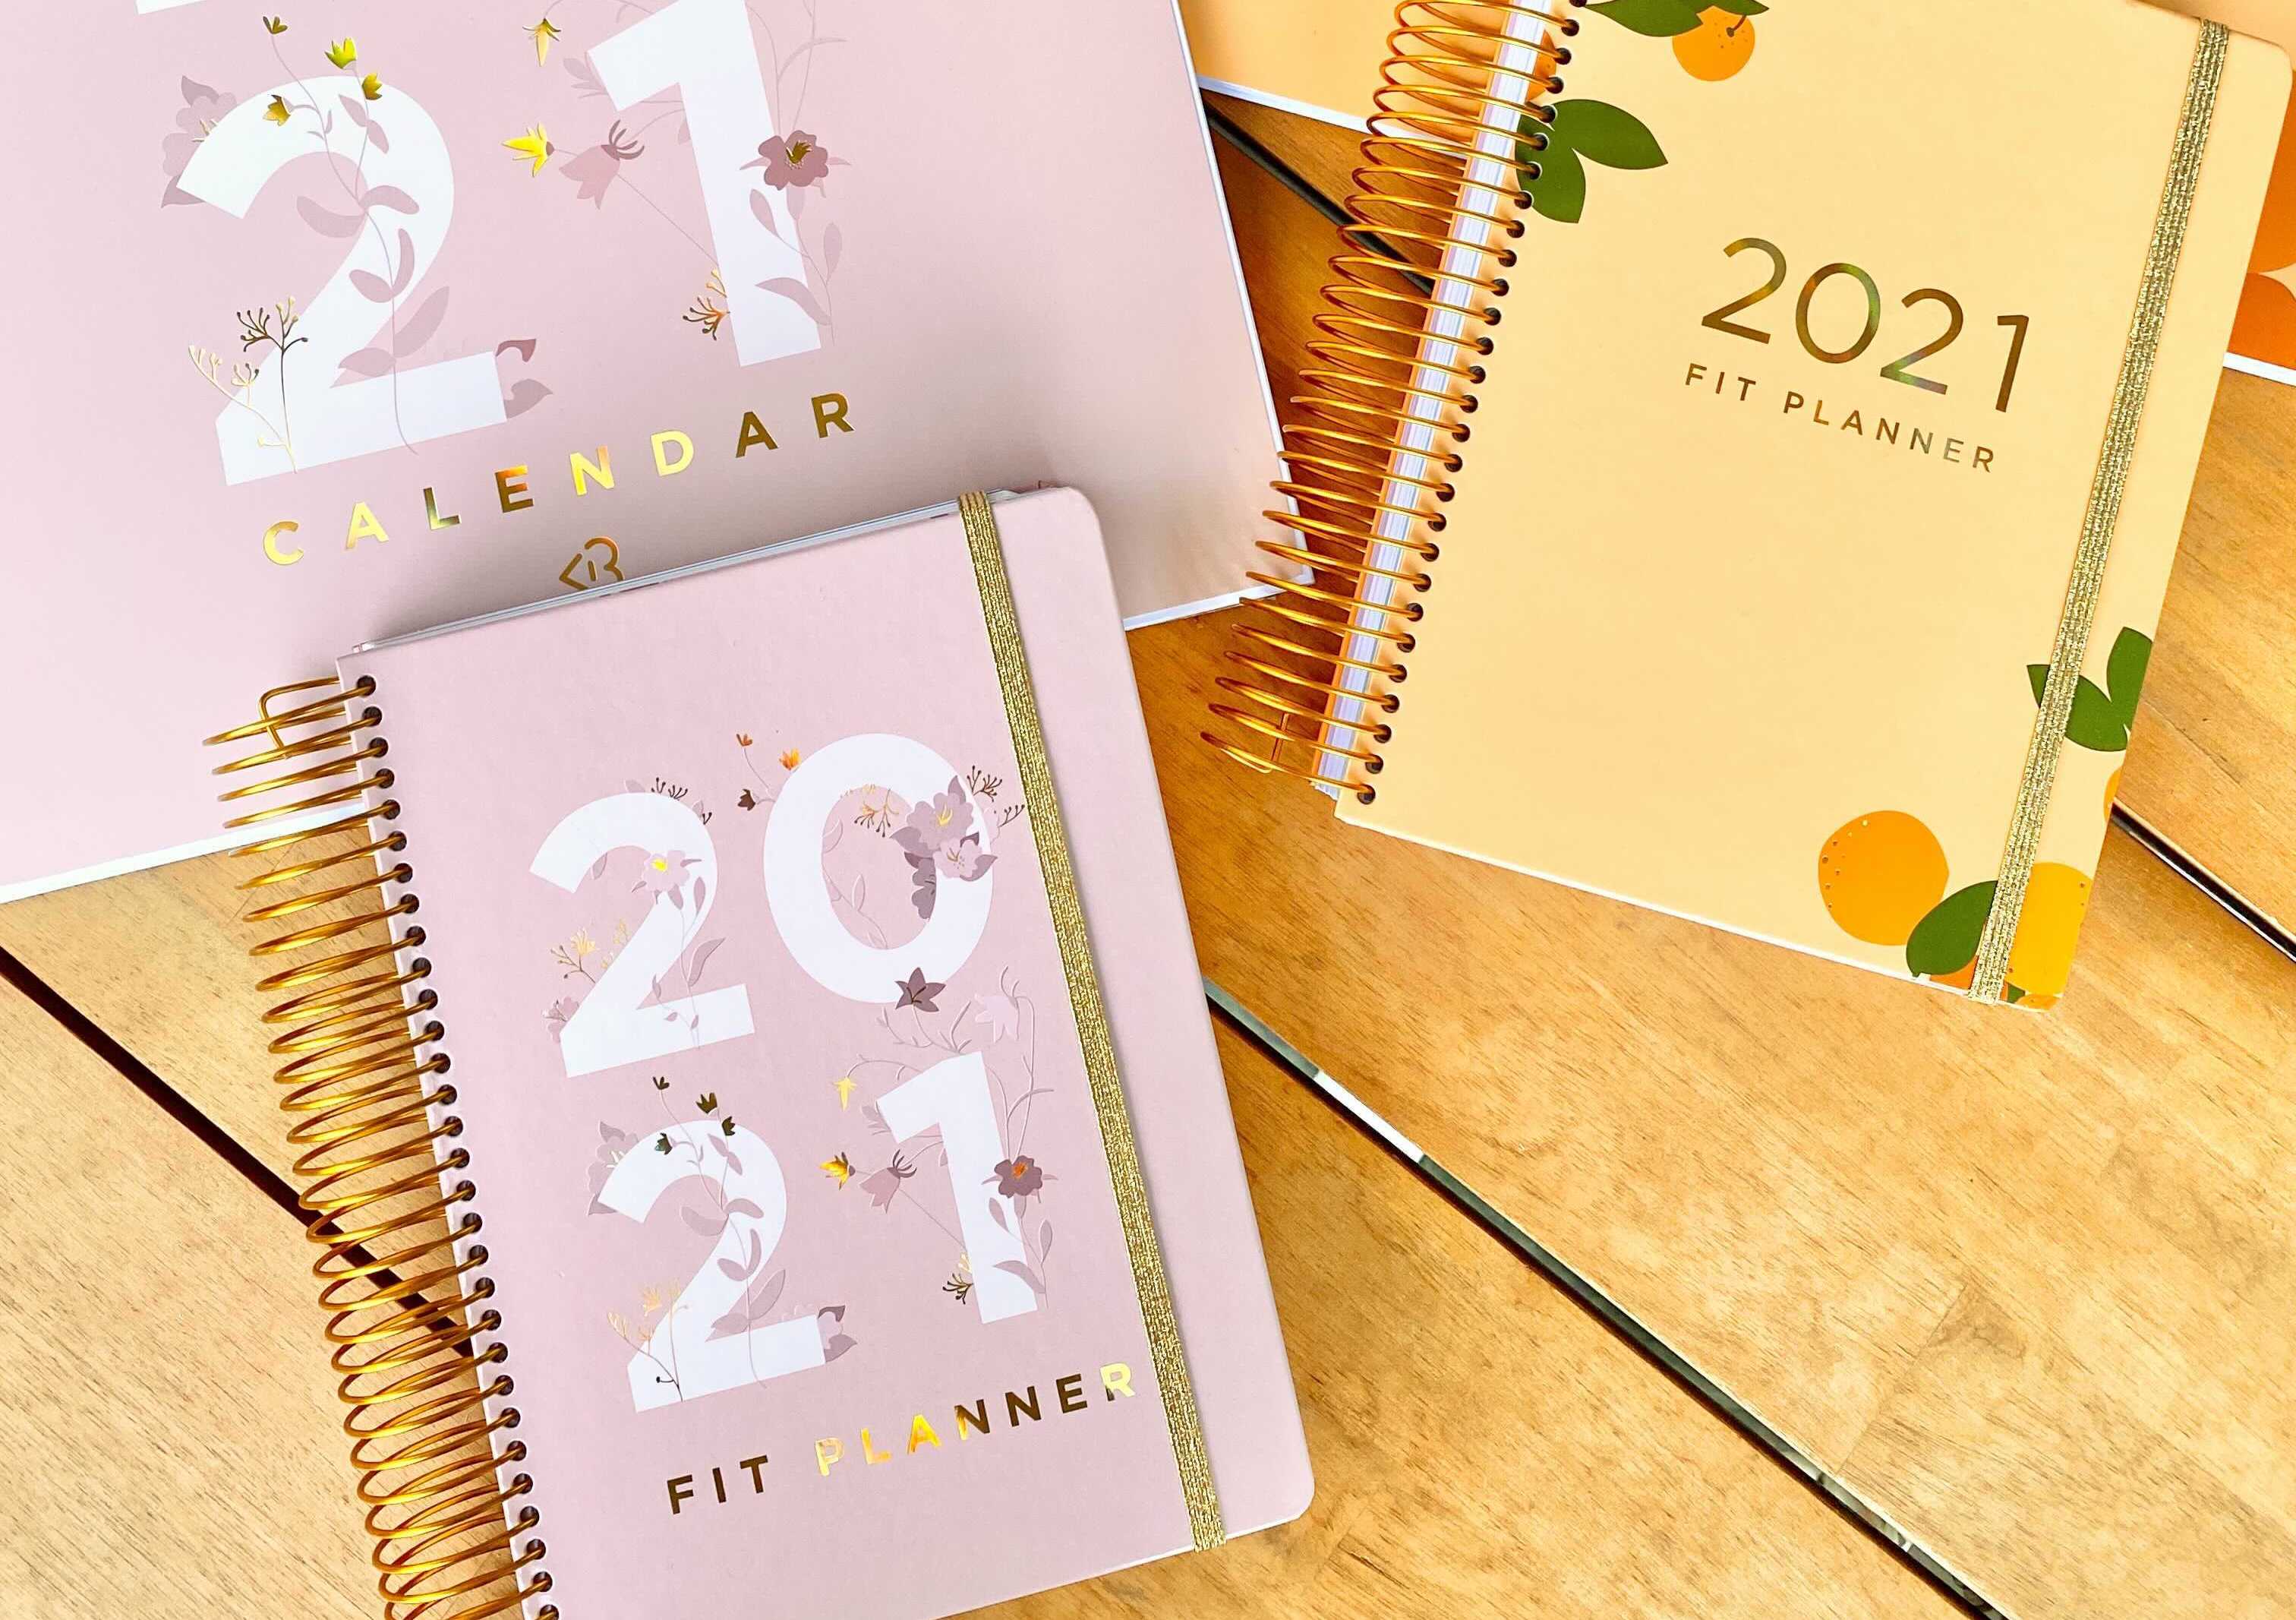 Crush Your Goals in 2021 With the New Fit Planner